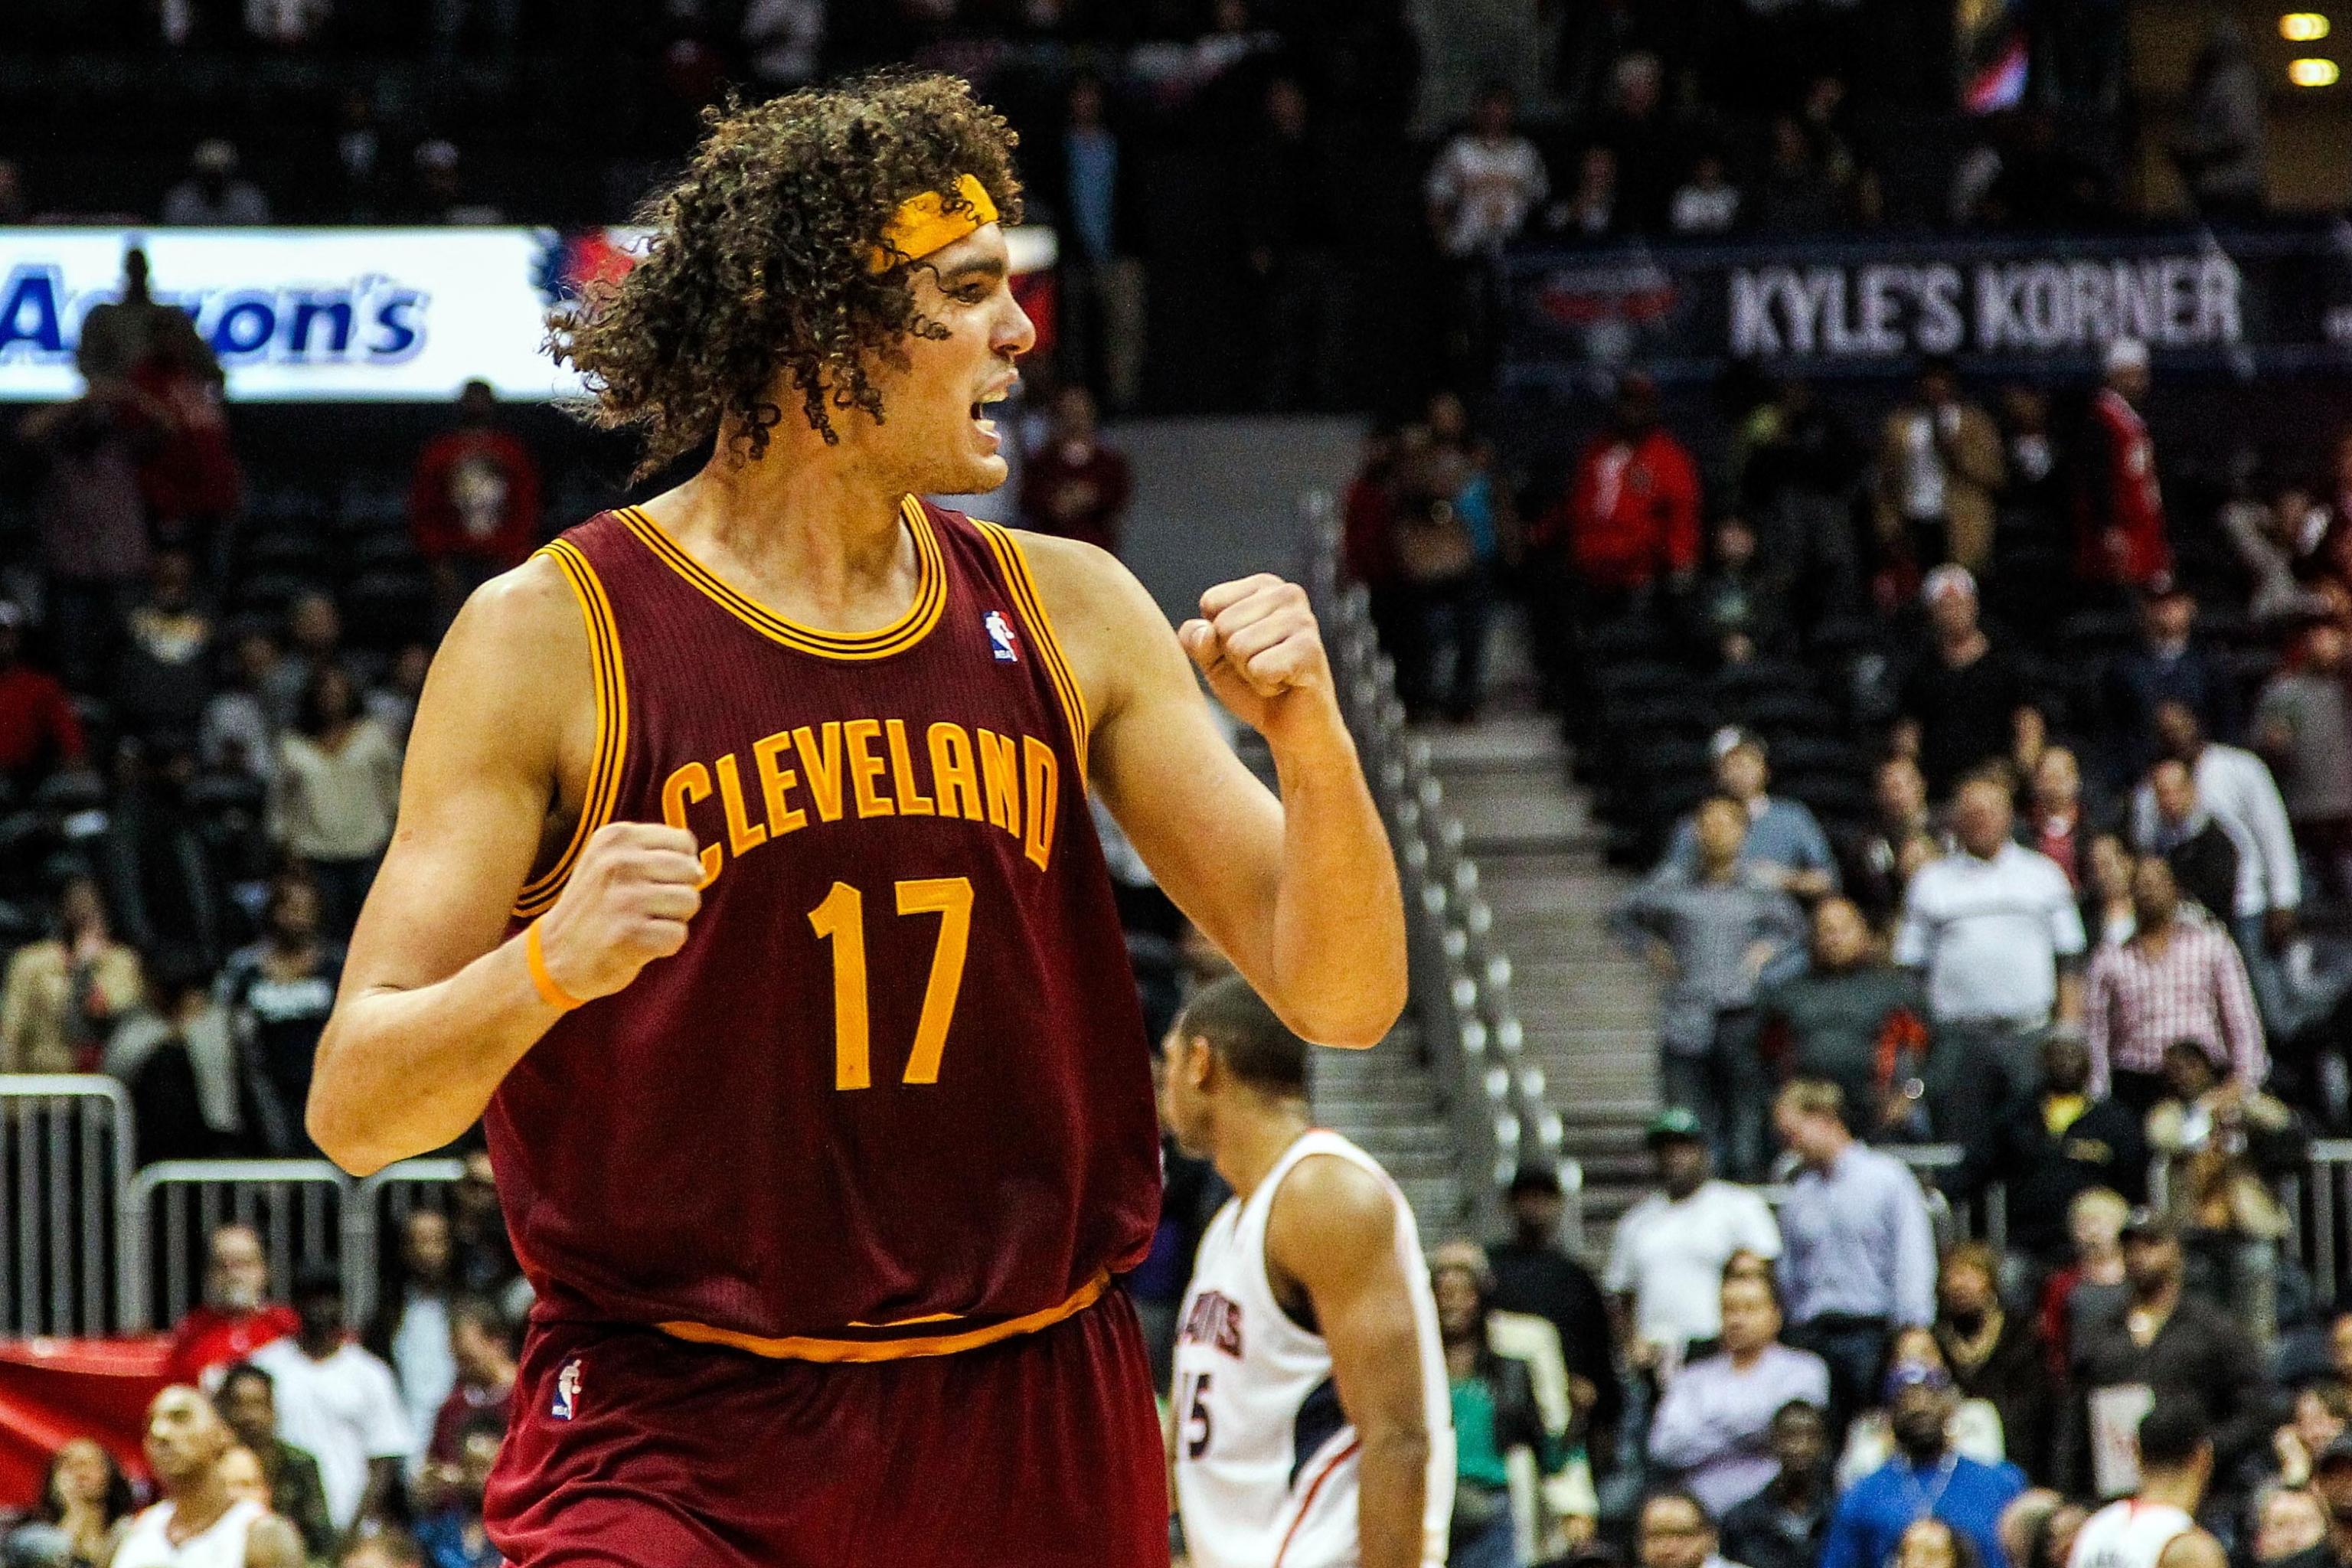 Anderson Varejao could get a ring if the Cavs win the title - Fear The Sword